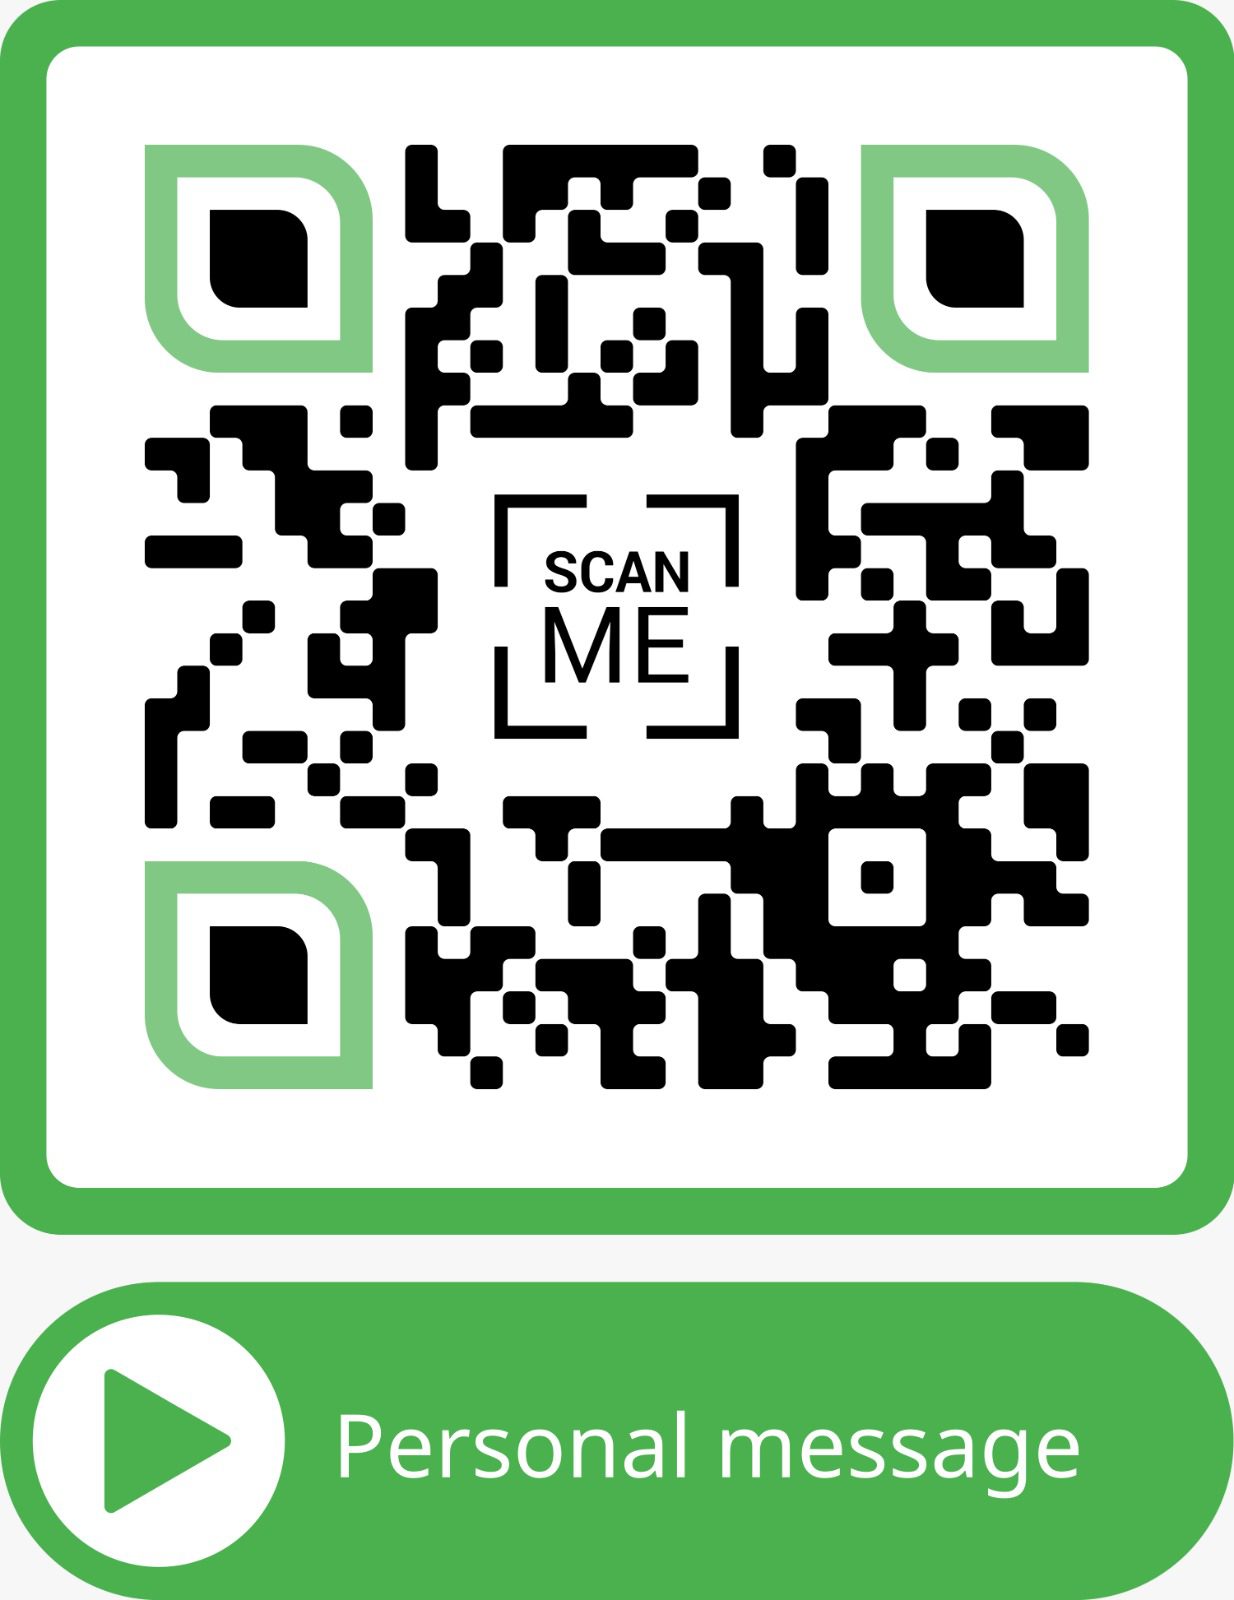 Use QR codes when learning how to prepare for an interview